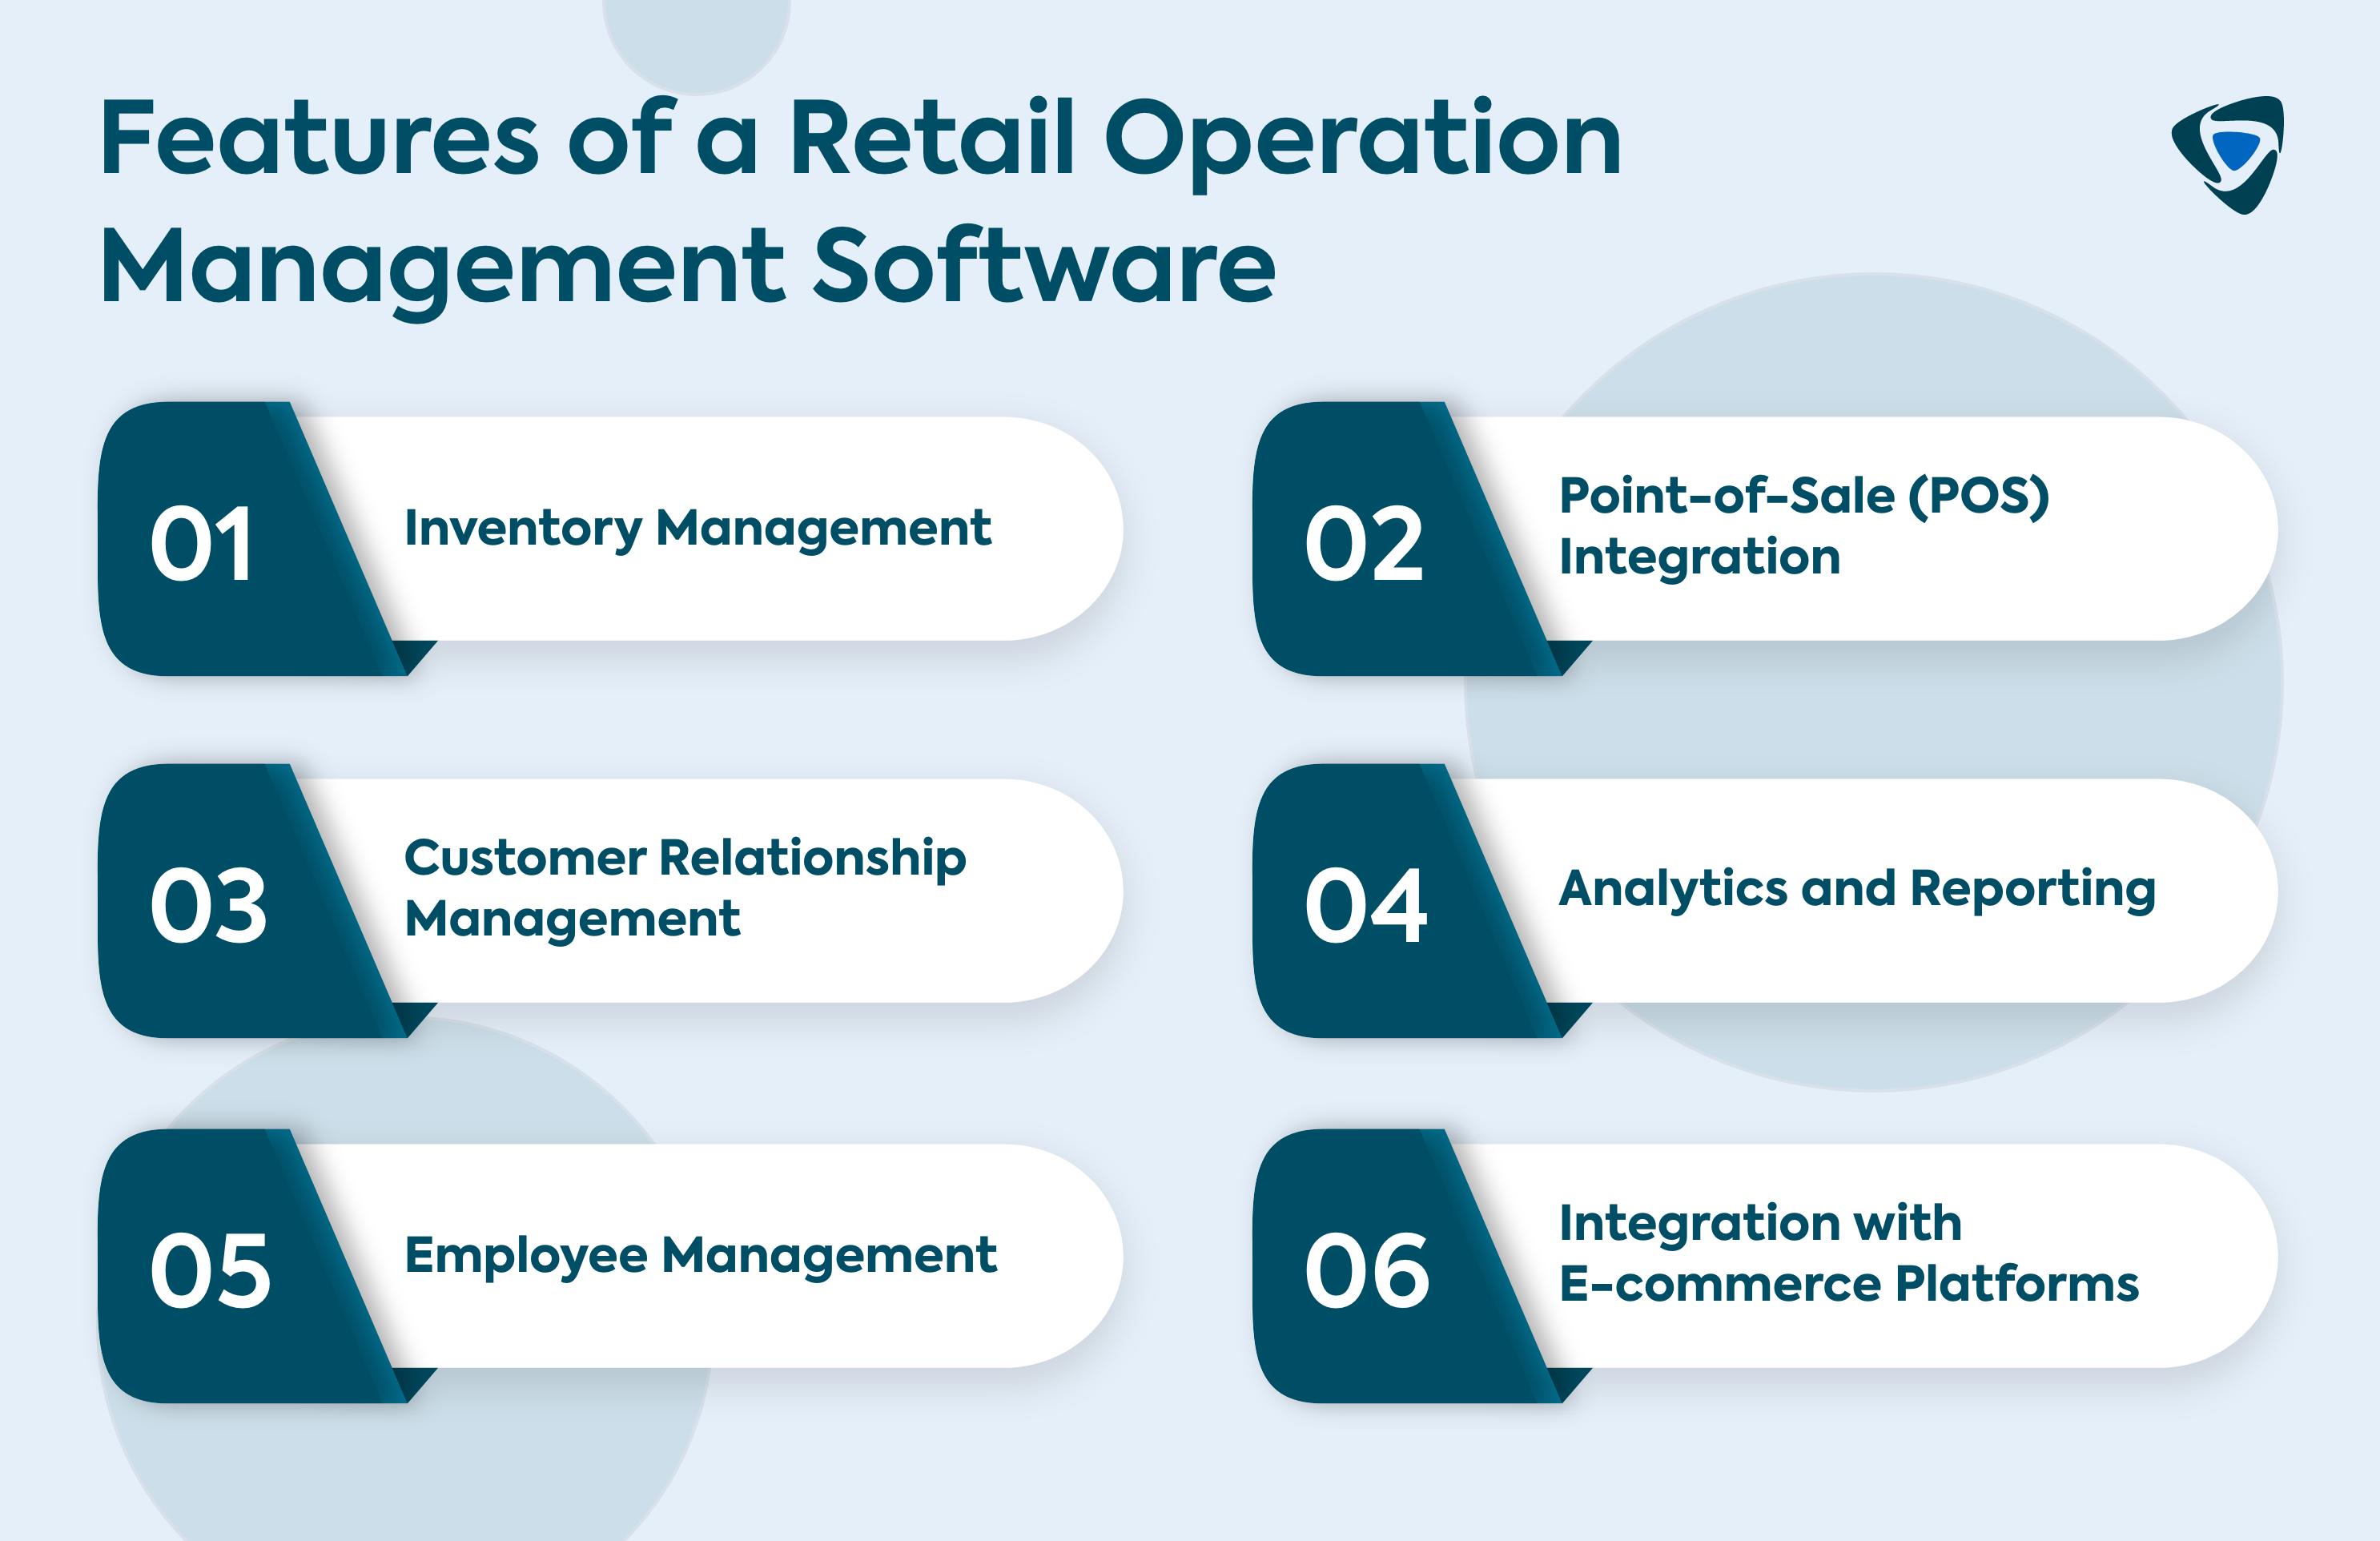 Features of a Retail Operation Management Software